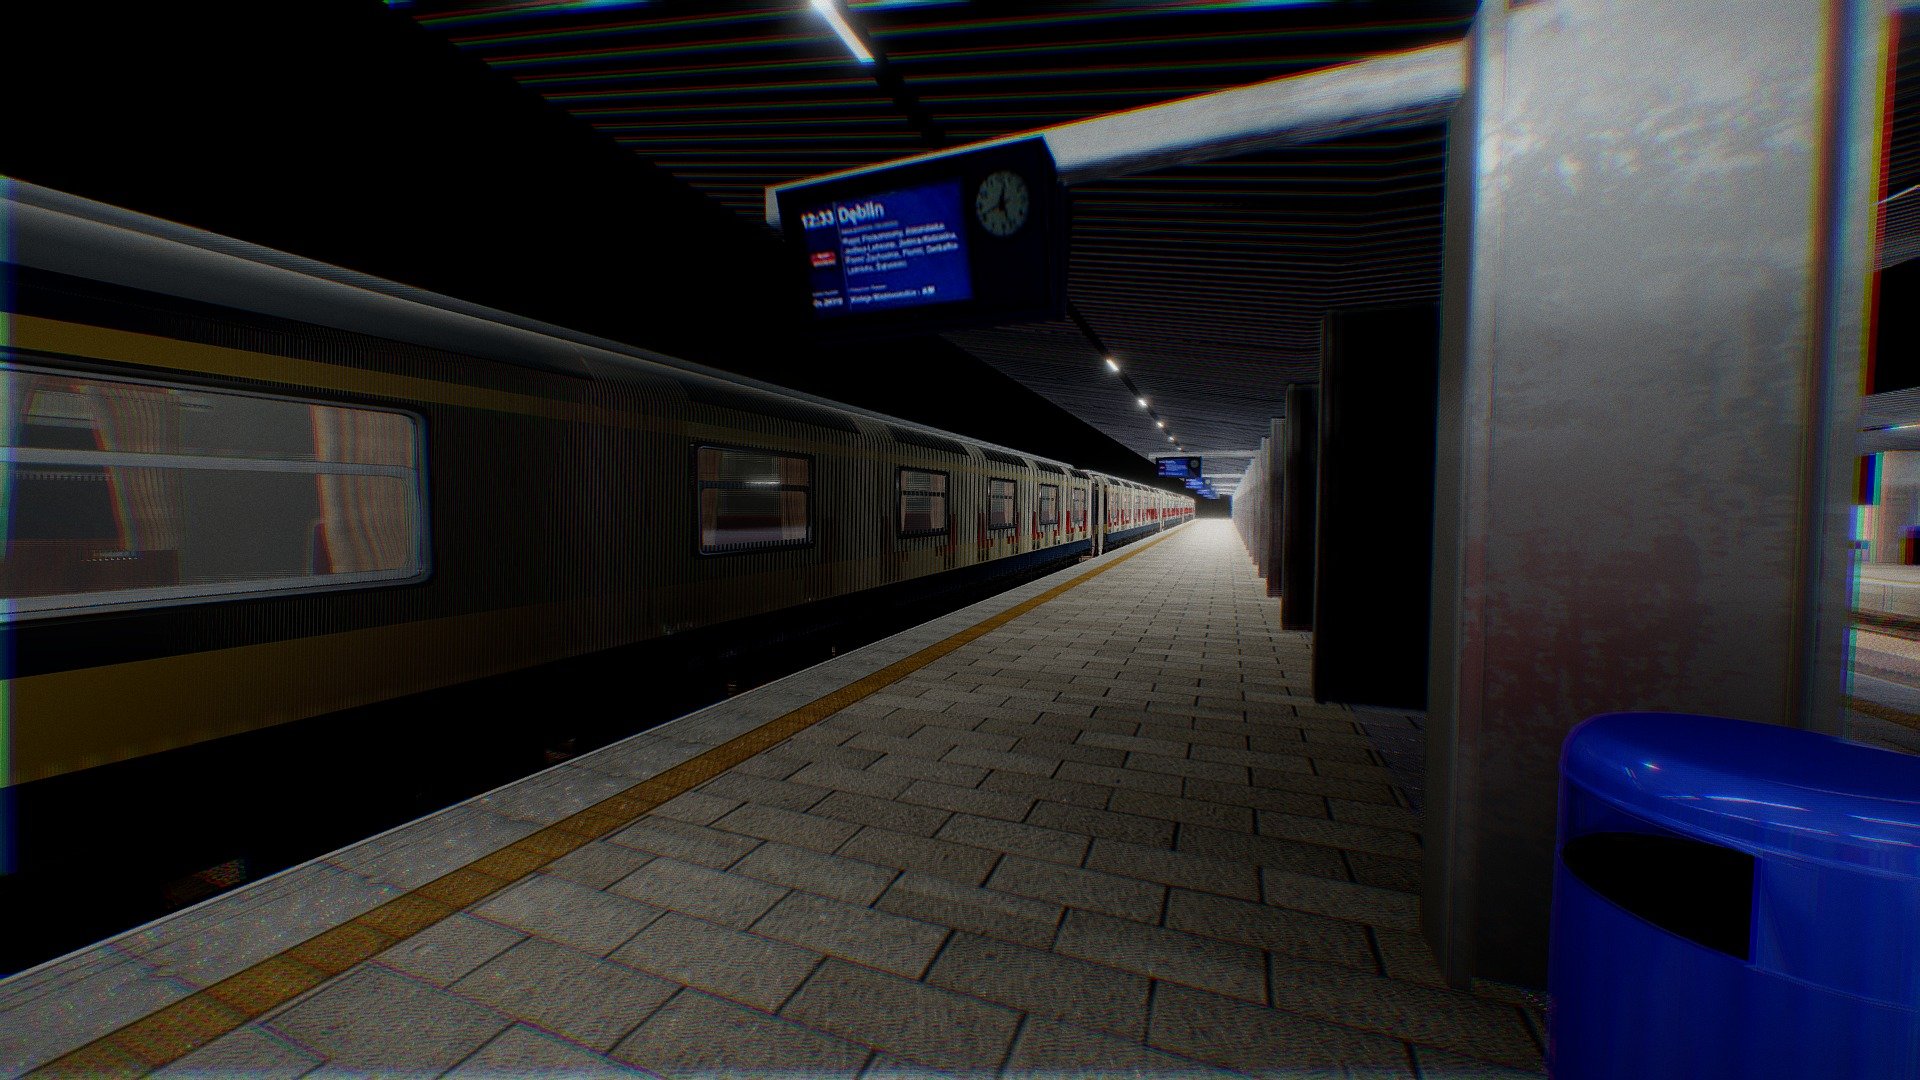 Railway Station Assets

Made in Blender - Railway Station Assets With Train Interior - Buy Royalty Free 3D model by AirStudios (@sebbe613) 3d model